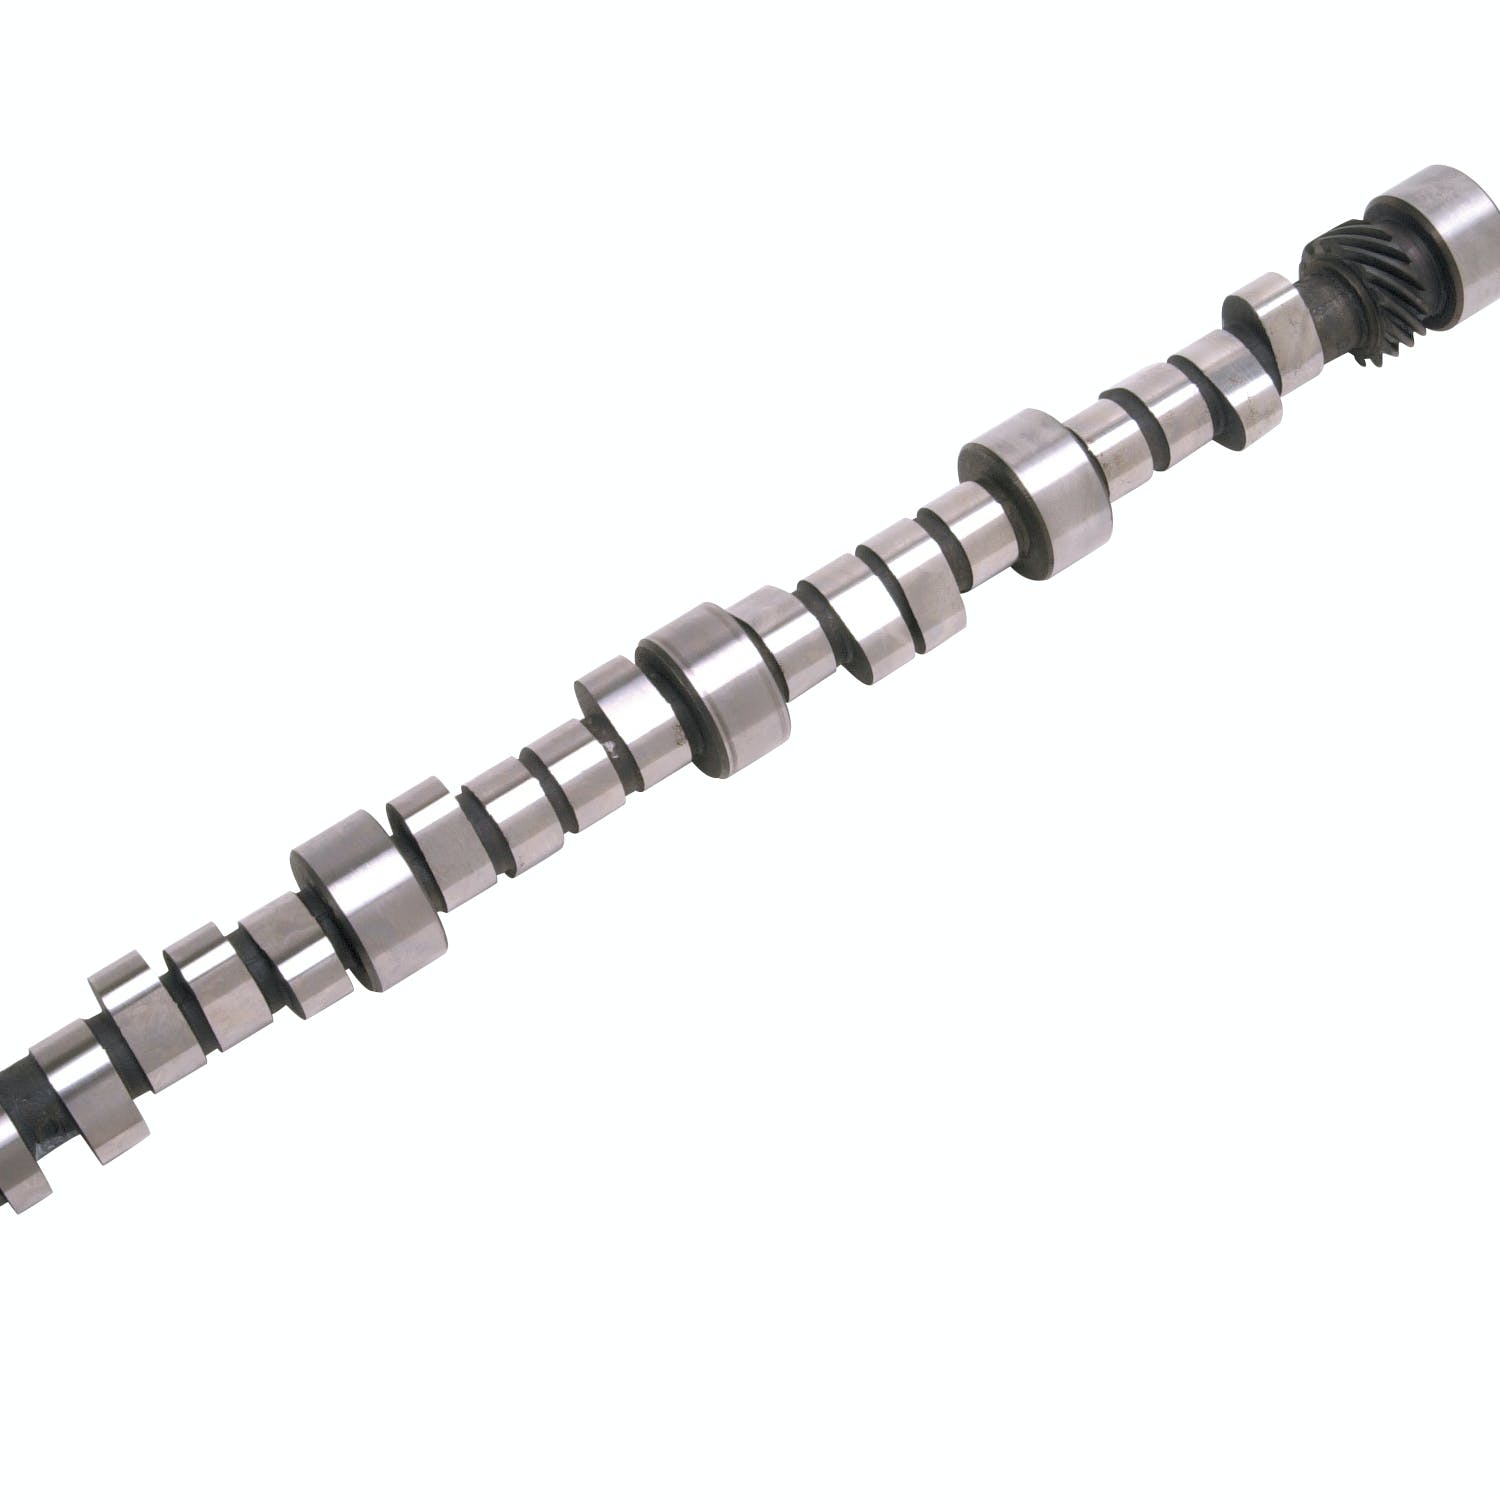 Edelbrock 2201 CAMSHAFT, SBC PERFORMER RPM HYDRAULIC ROLLER FOR EARLY MODEL YEAR ENGINES